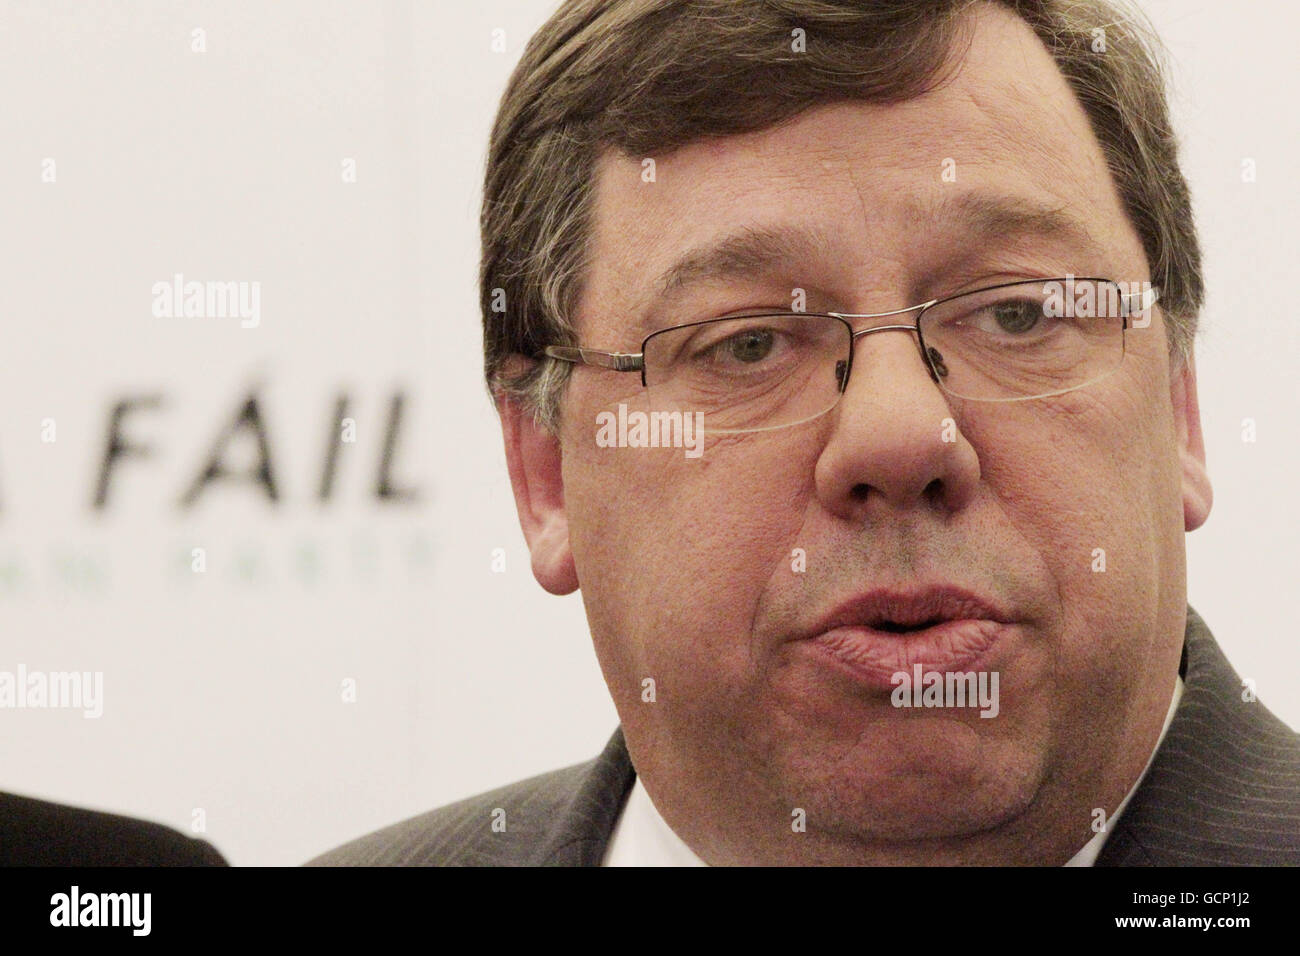 Taoiseach Brian Cowen at the Ardilaun Hotel in Galway city where he held a press conference to deny giving a live radio interview while drunk or hungover during the Fianna Fail party's annual get together ahead of the new Dail (parliament) term. Stock Photo